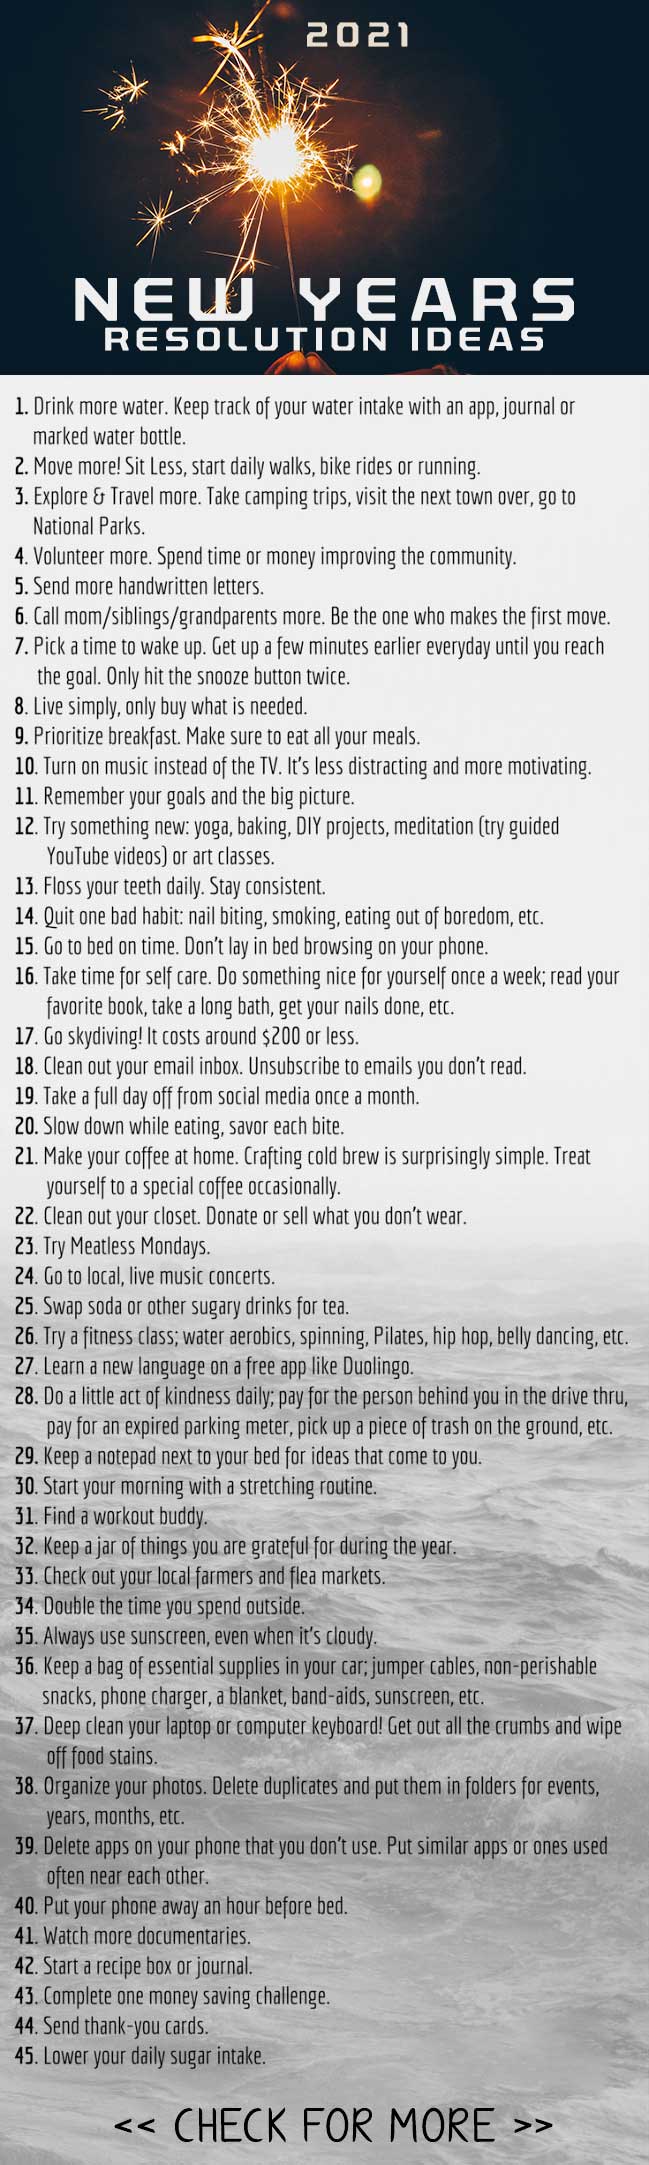 What-Are-Your-New-Years-Resolutions-Inspirational-Ideas-Poster-2021